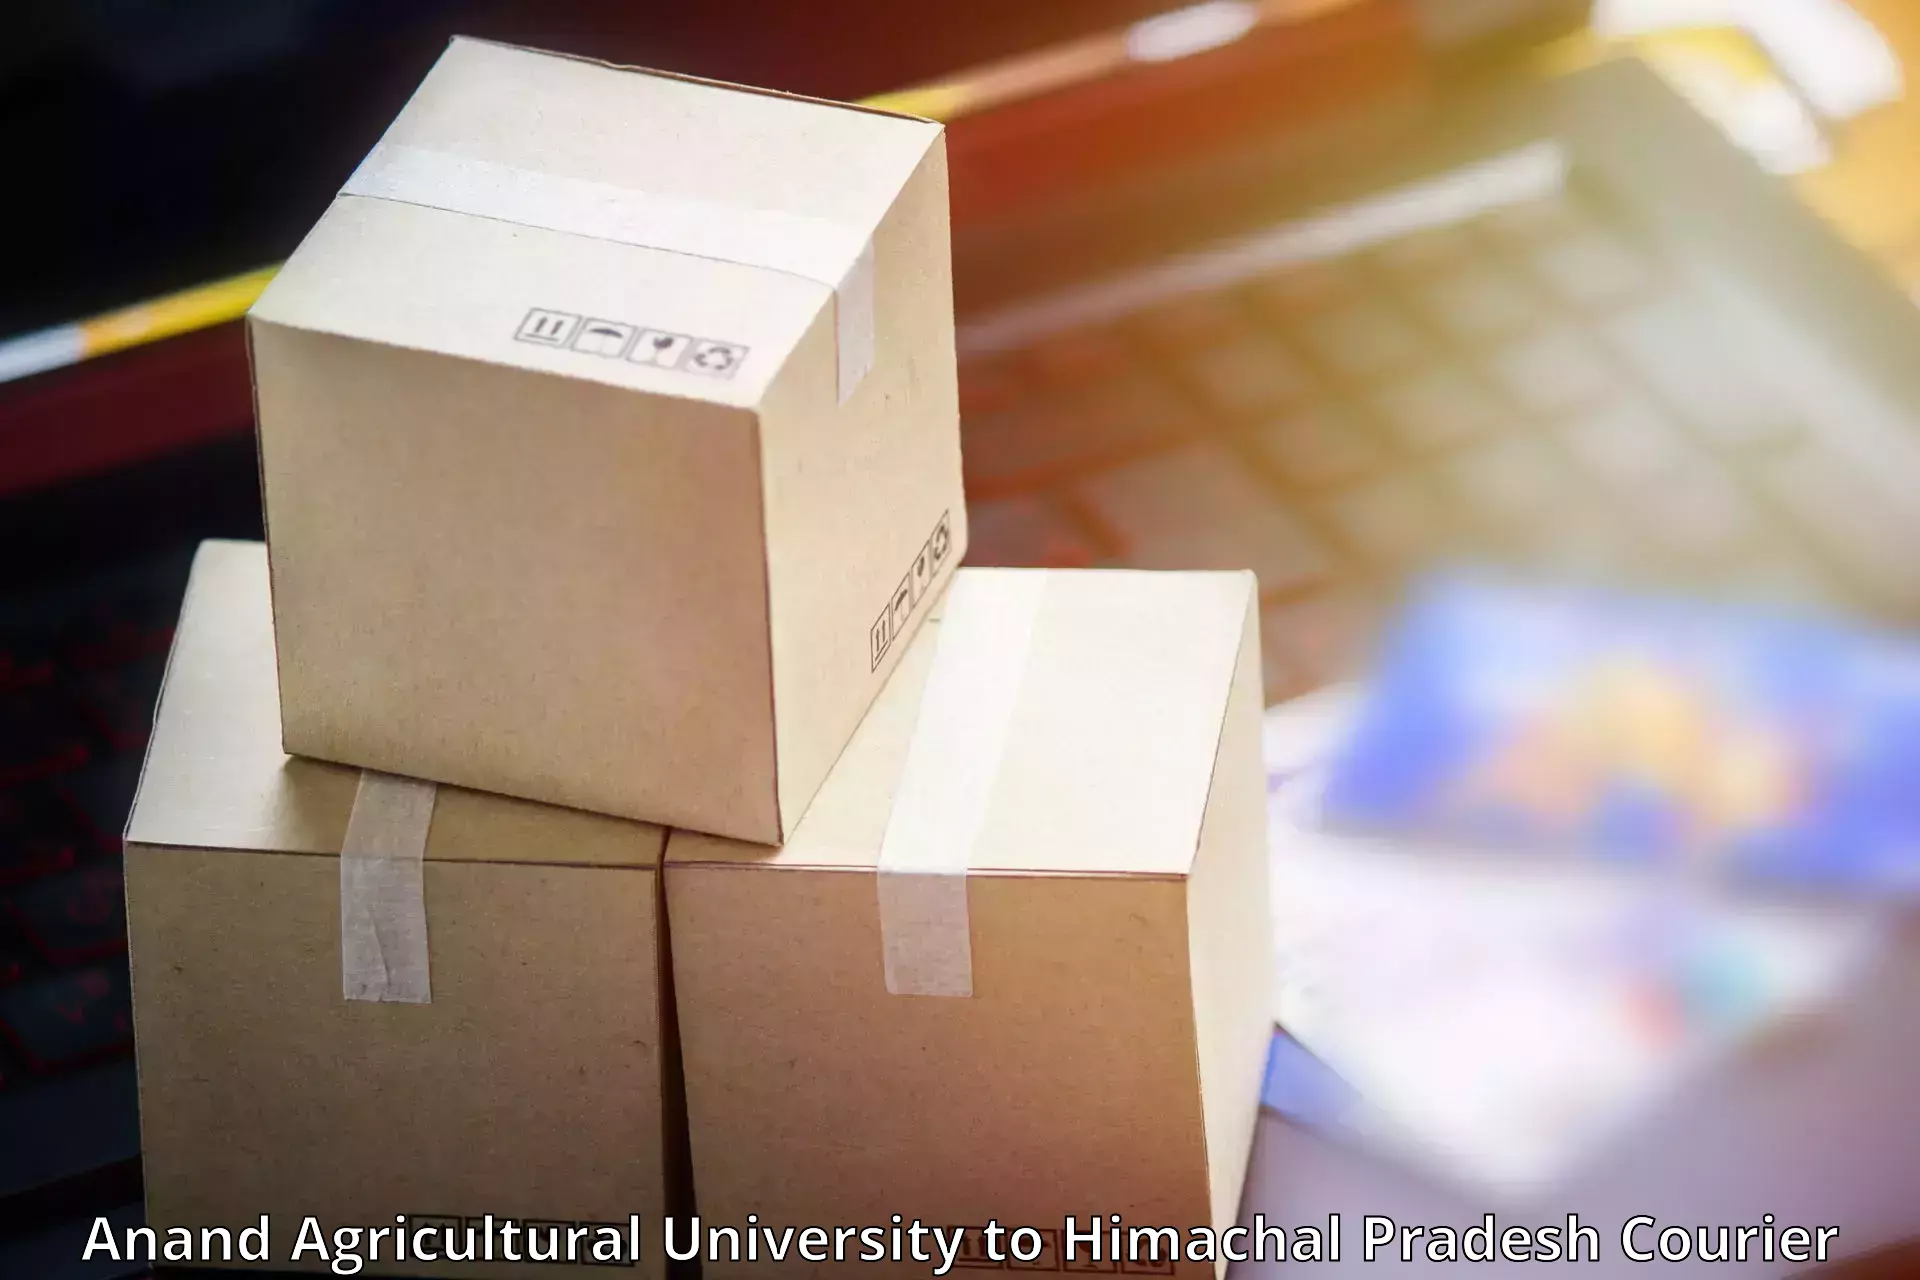 High-capacity parcel service Anand Agricultural University to Indora